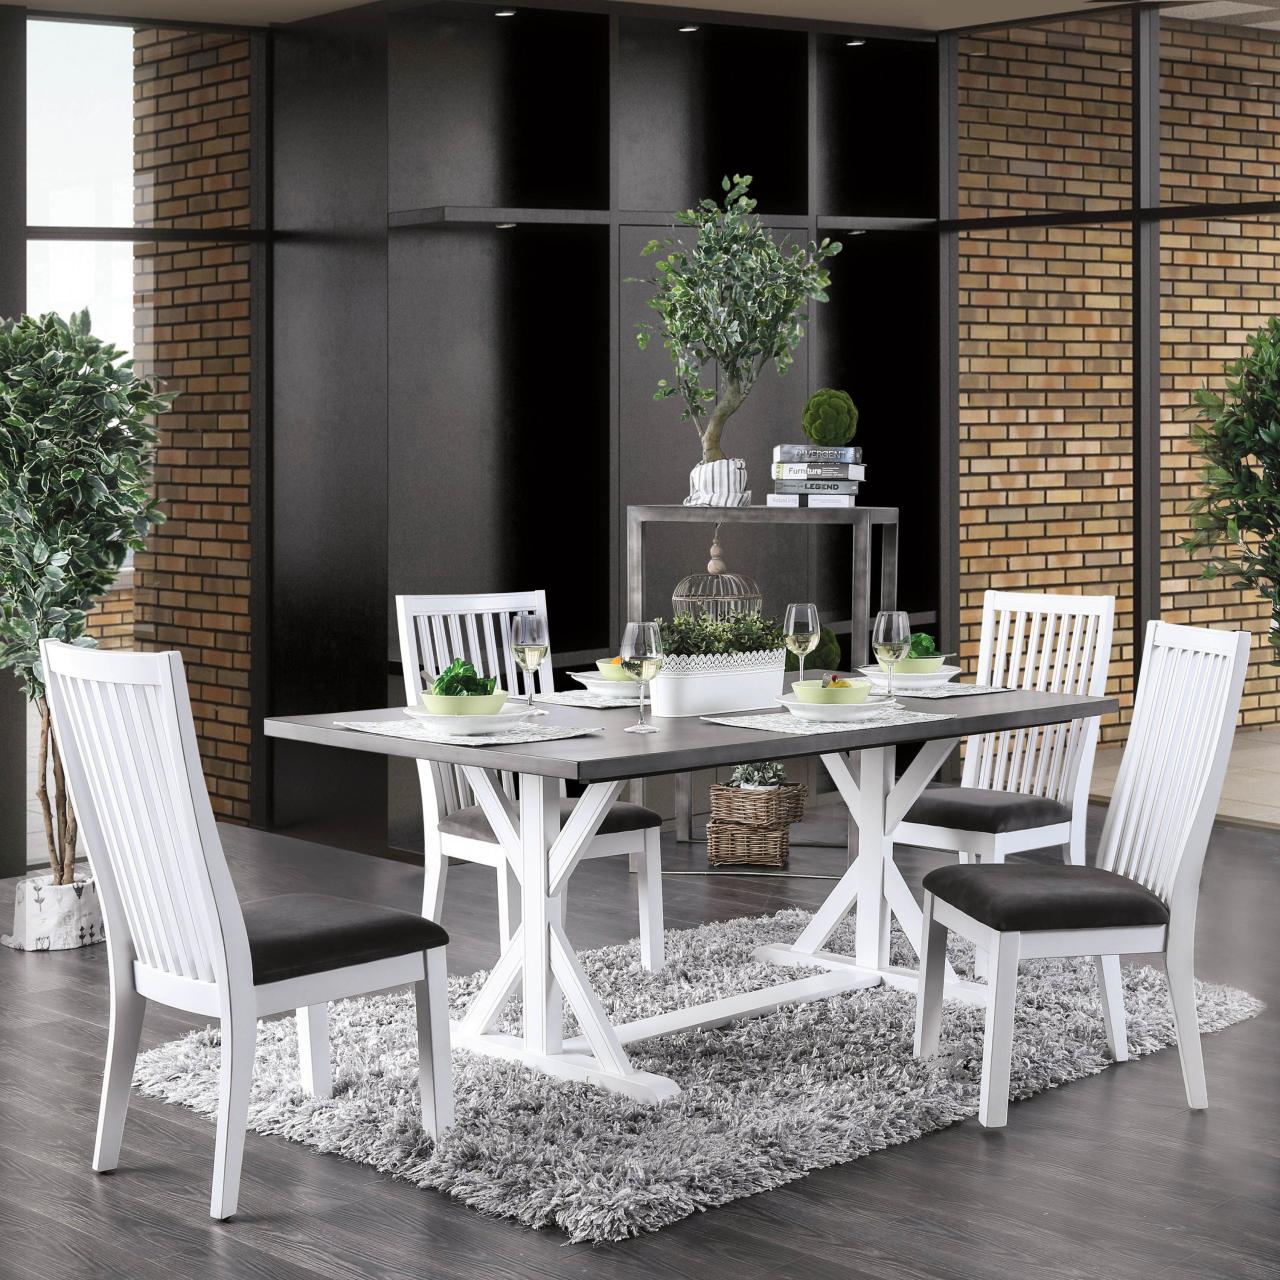 Dining sets overstock room set filed under furniture quick guide chair